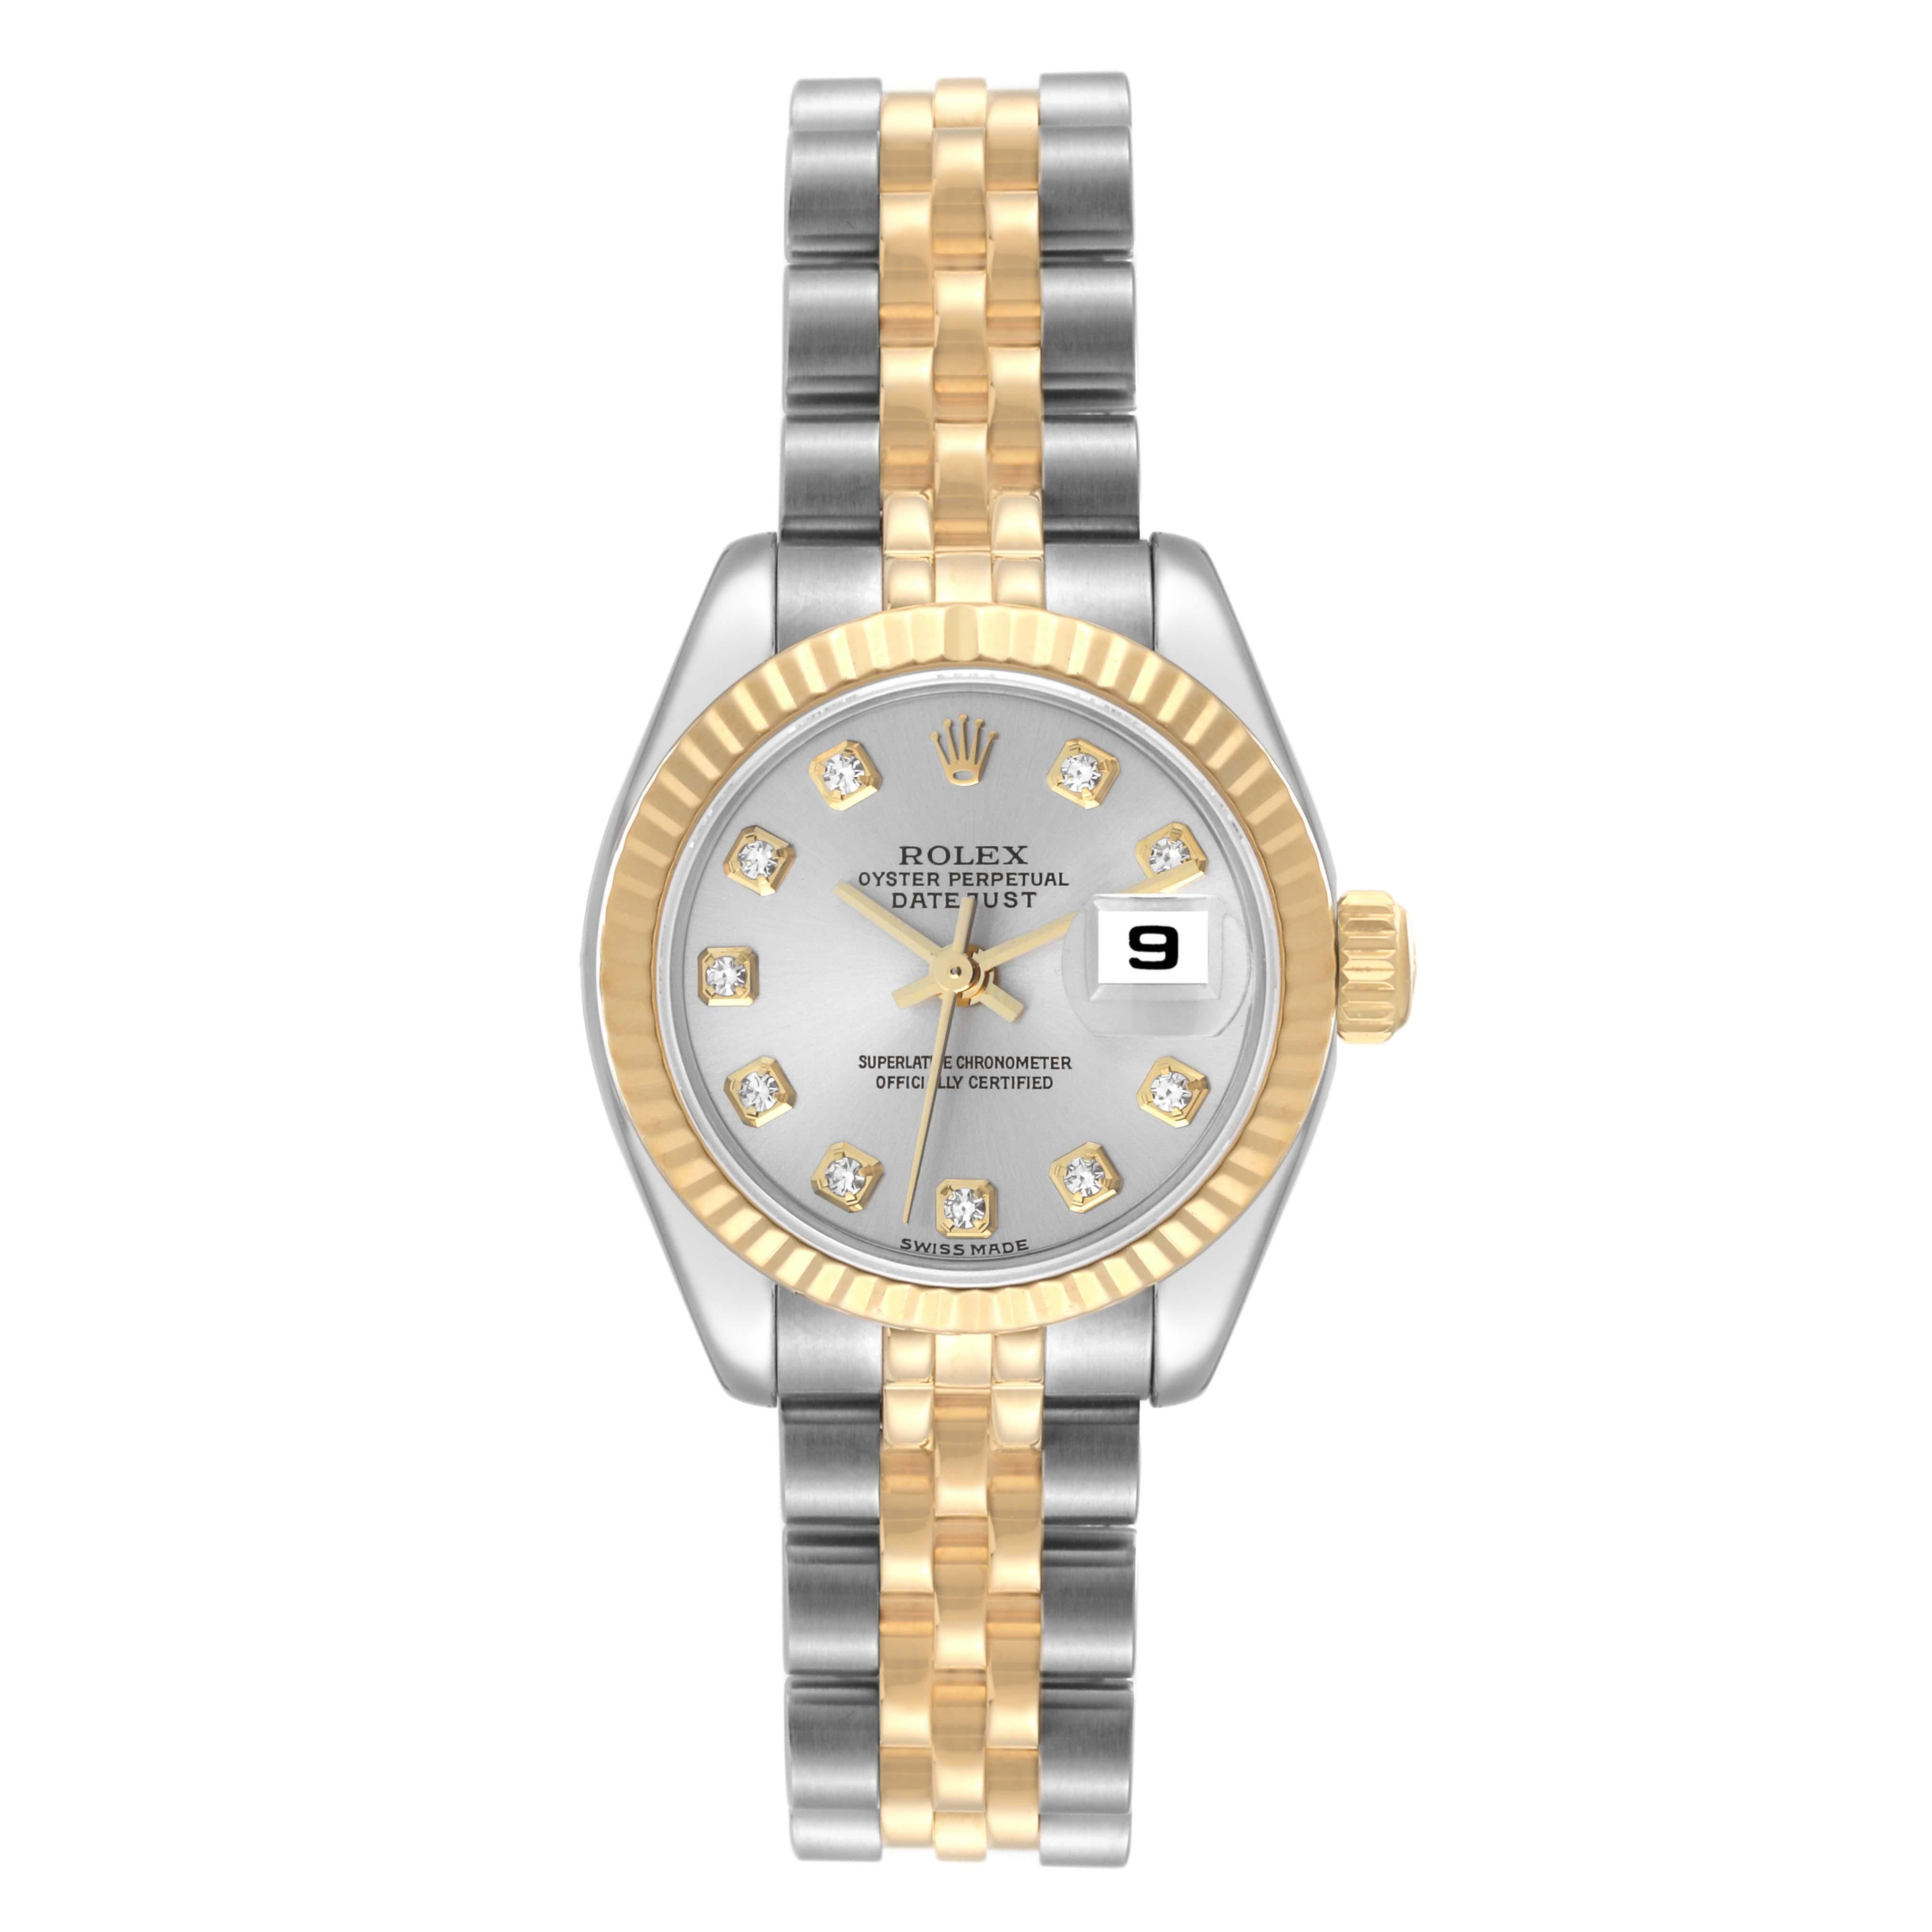 Rolex Datejust 26 Steel Yellow Gold Diamond Ladies Watch 179173. Officially certified chronometer self-winding movement. Stainless steel oyster case 26 mm in diameter. Rolex logo on a 18K yellow gold crown. 18k yellow gold fluted bezel. Scratch